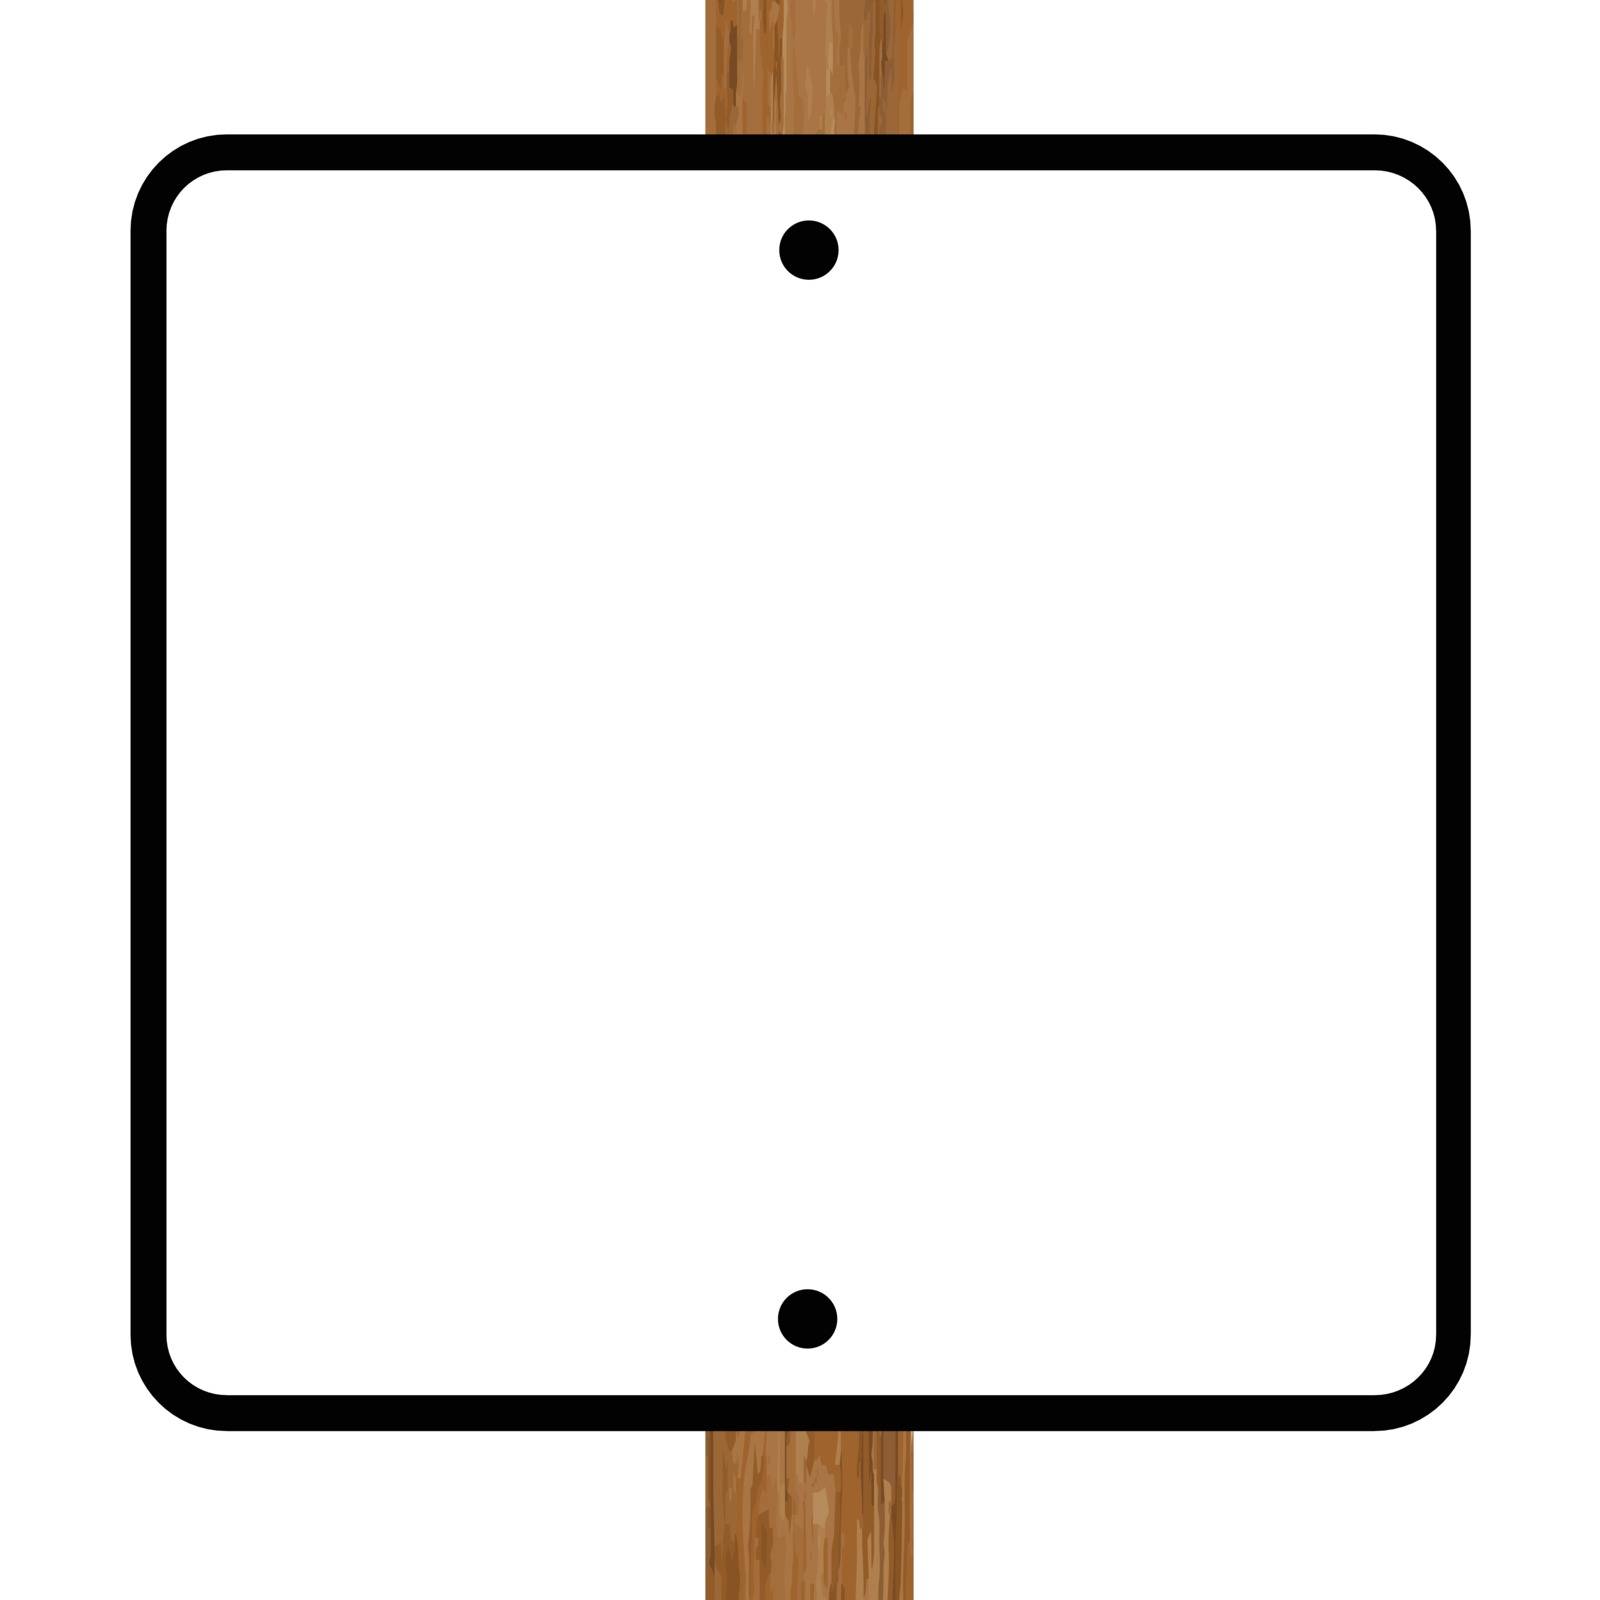 A Blank Square Sign over a white background